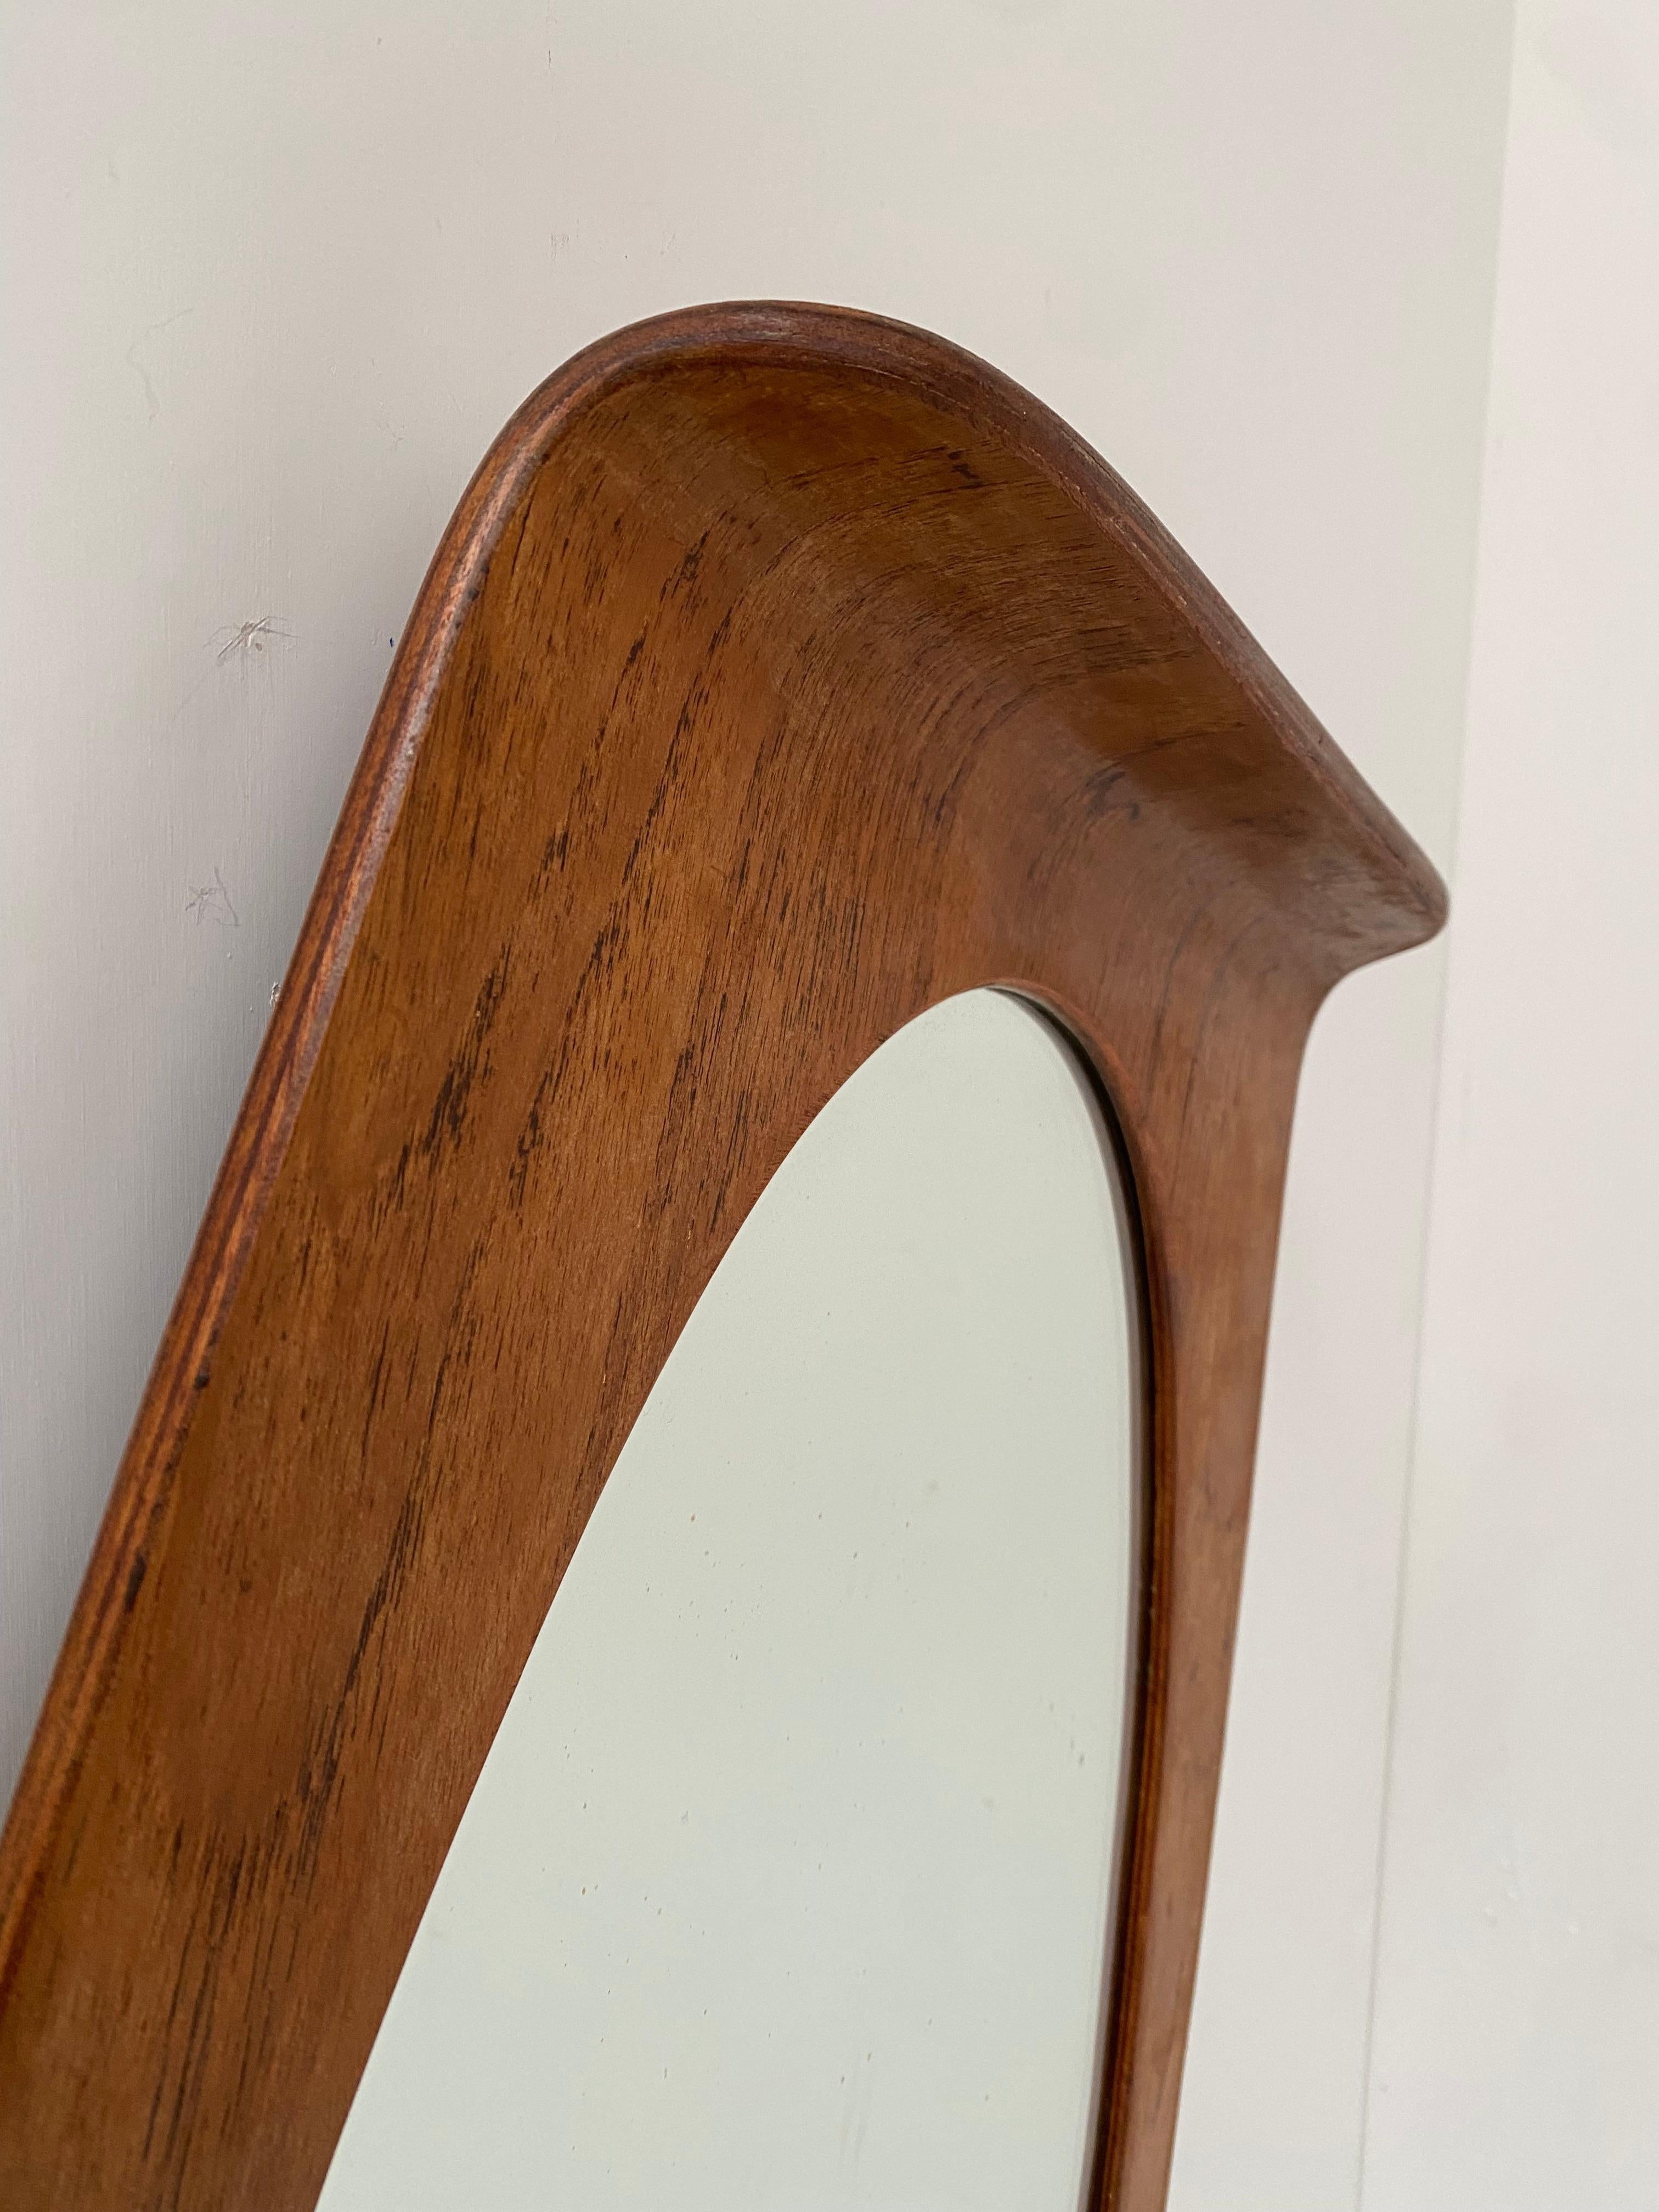 1950's Italian Teak Plywood mirror by master designers Franco Campo & Carlo Graffi for their furniture company HOME

This example has and shows it age and history and has period repairs as it once got damaged during its life
A piece with a beautiful